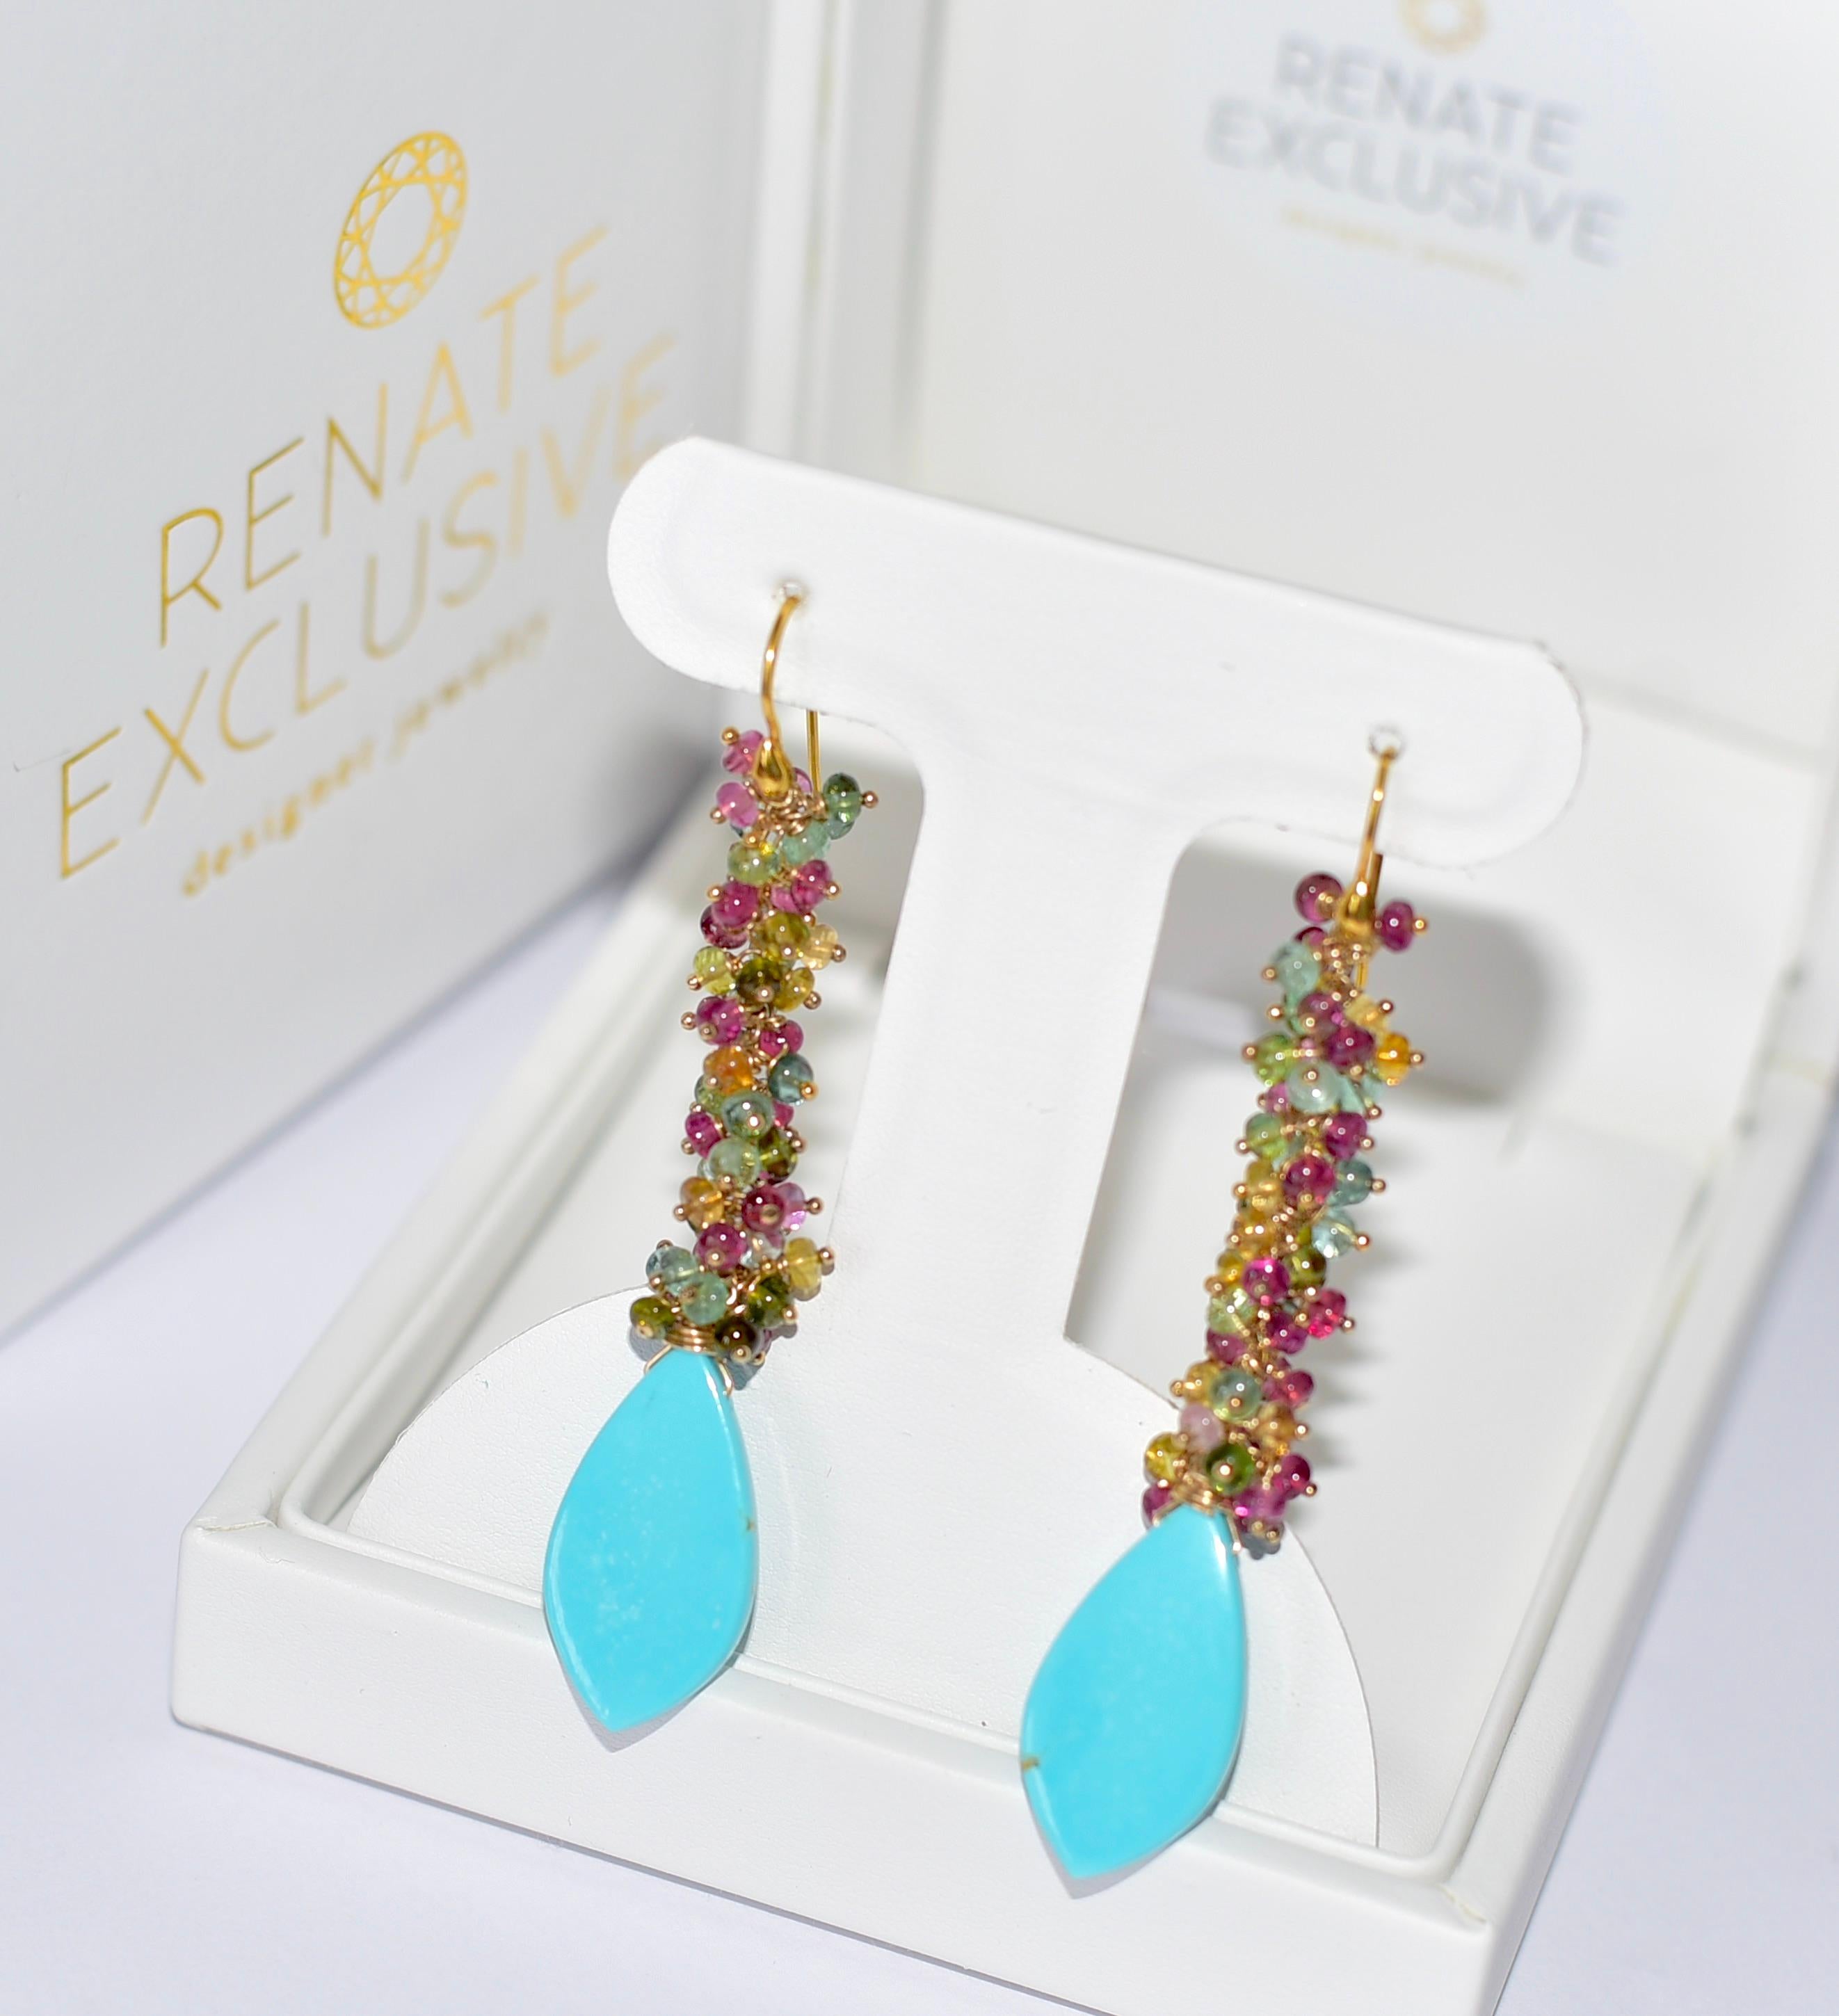 These earrings are a stunning mix of summer garden colors - these sinewy earrings are so gorgeous and fun to wear! A mix of turquoise and colorful tourmalines reminds me of a perfect getaway to the Caribbean!